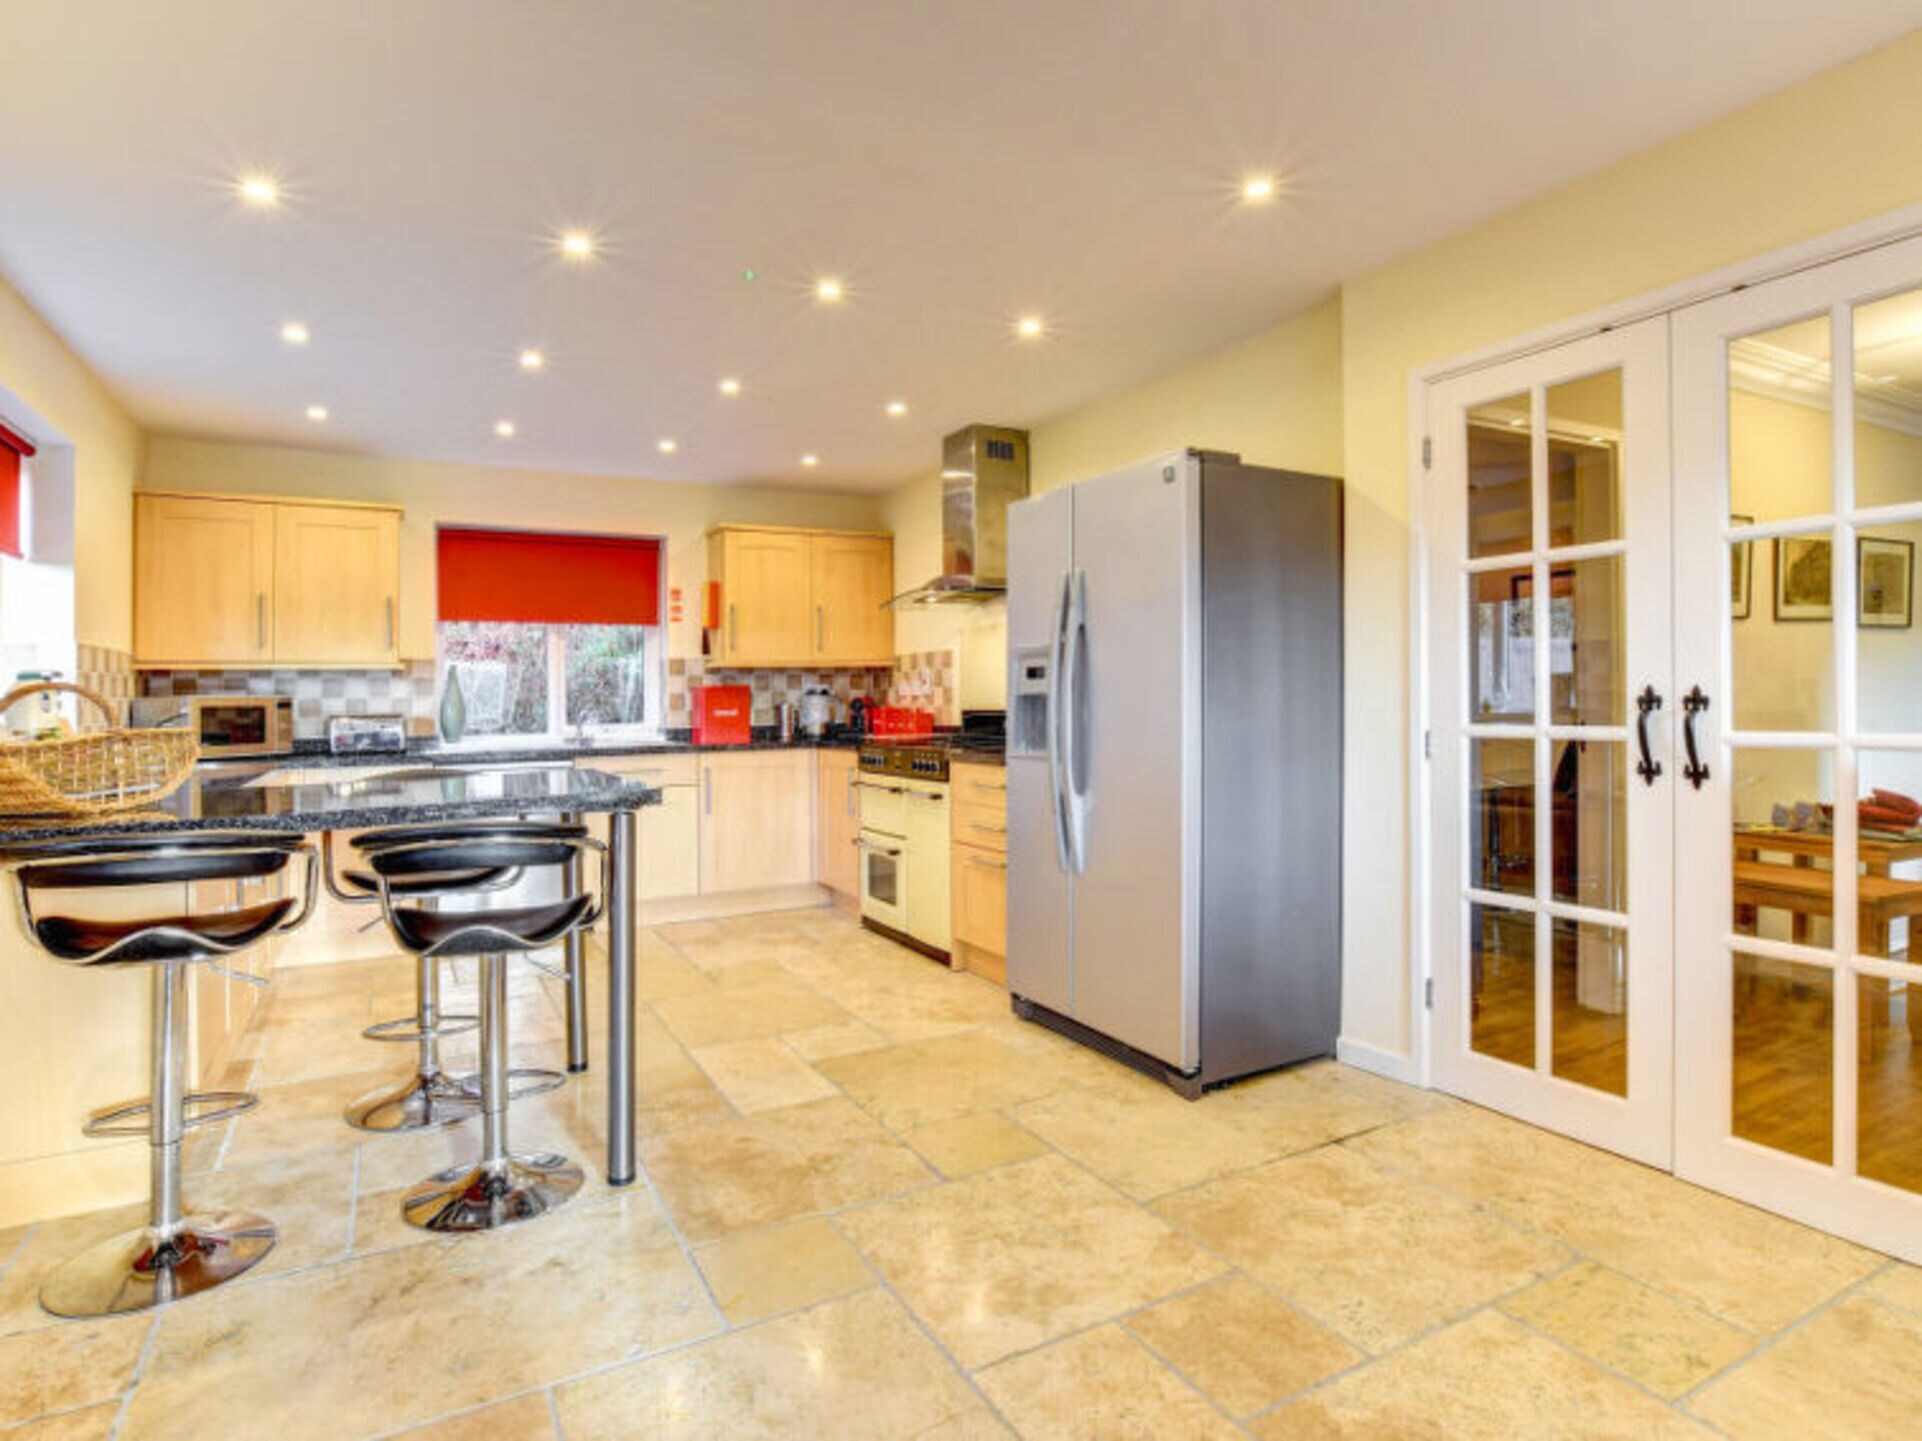 Property Image 1 - The Ultimate Villa in an Ideal Location, Wales Villa 1022